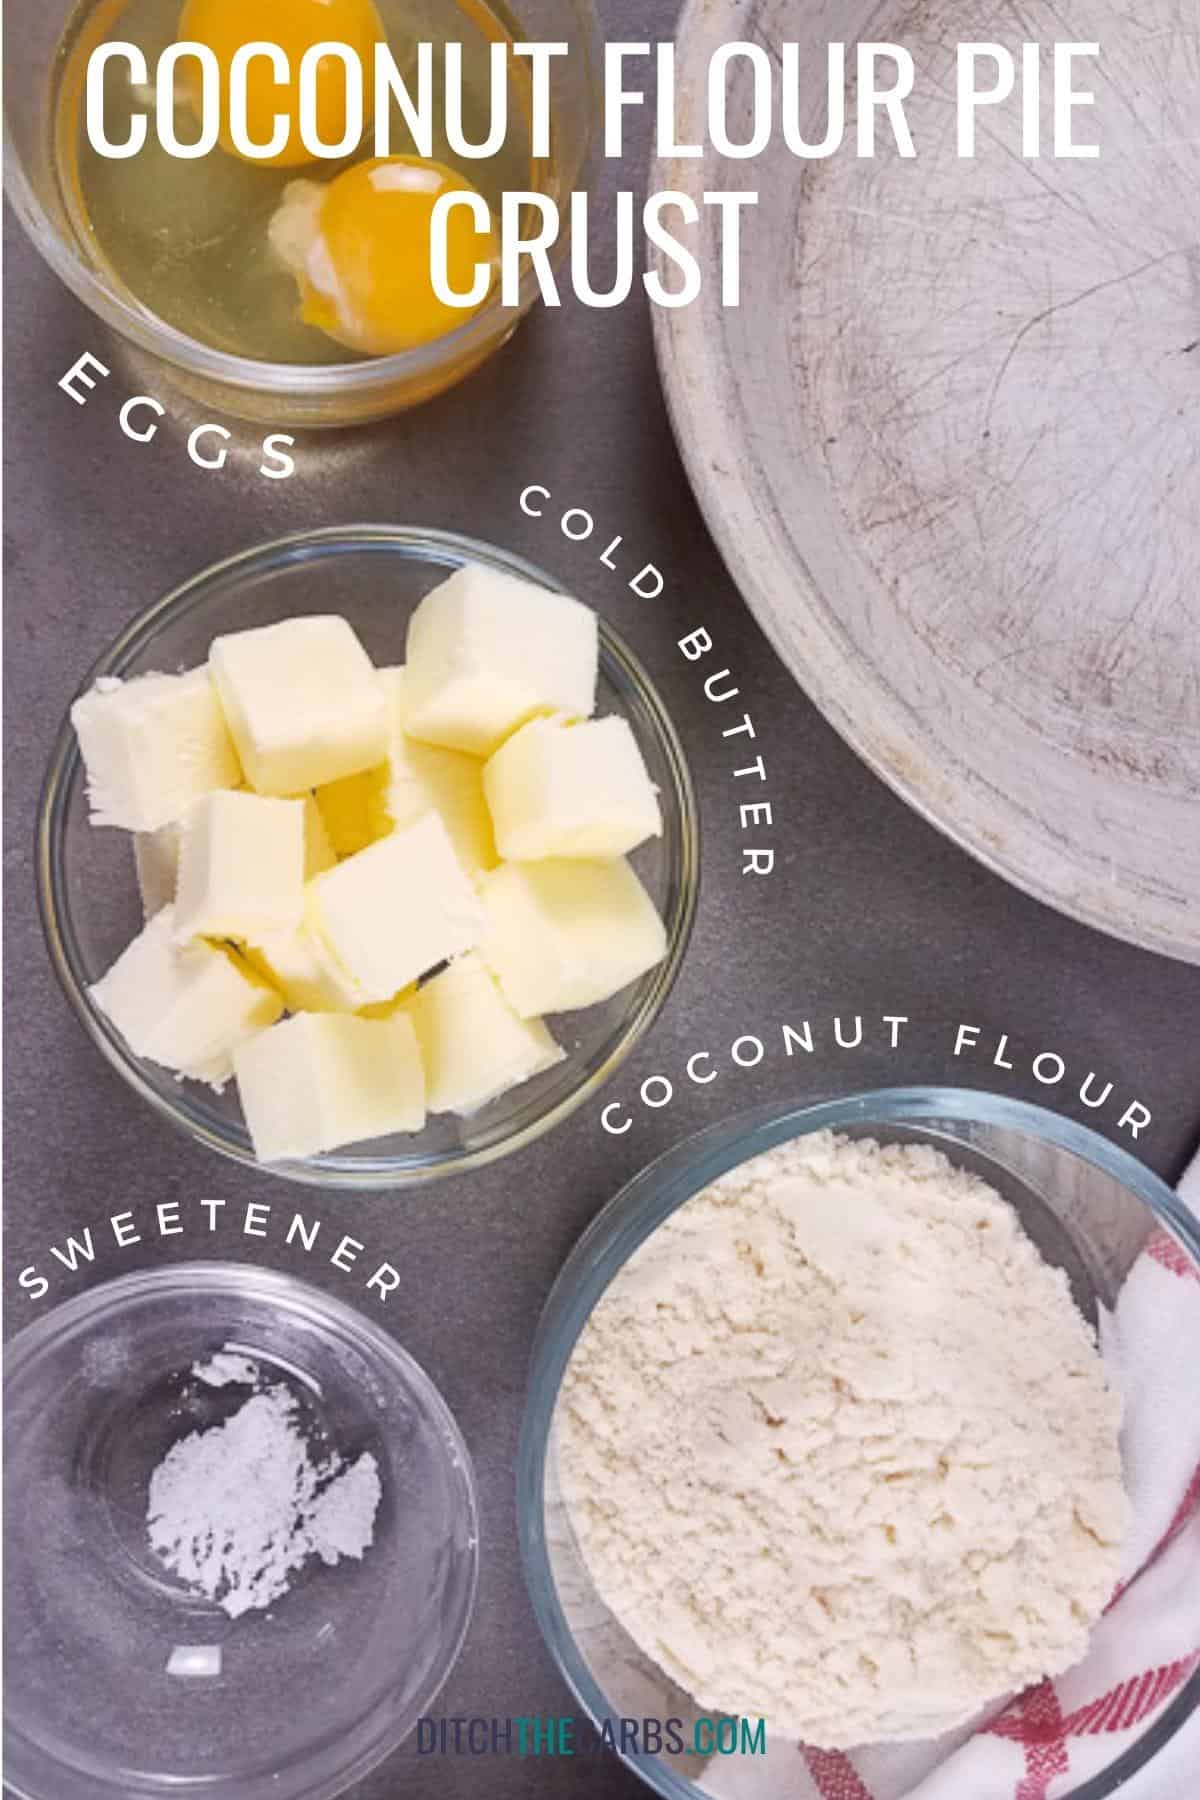 ingredients needed for a coconut flour pie crust